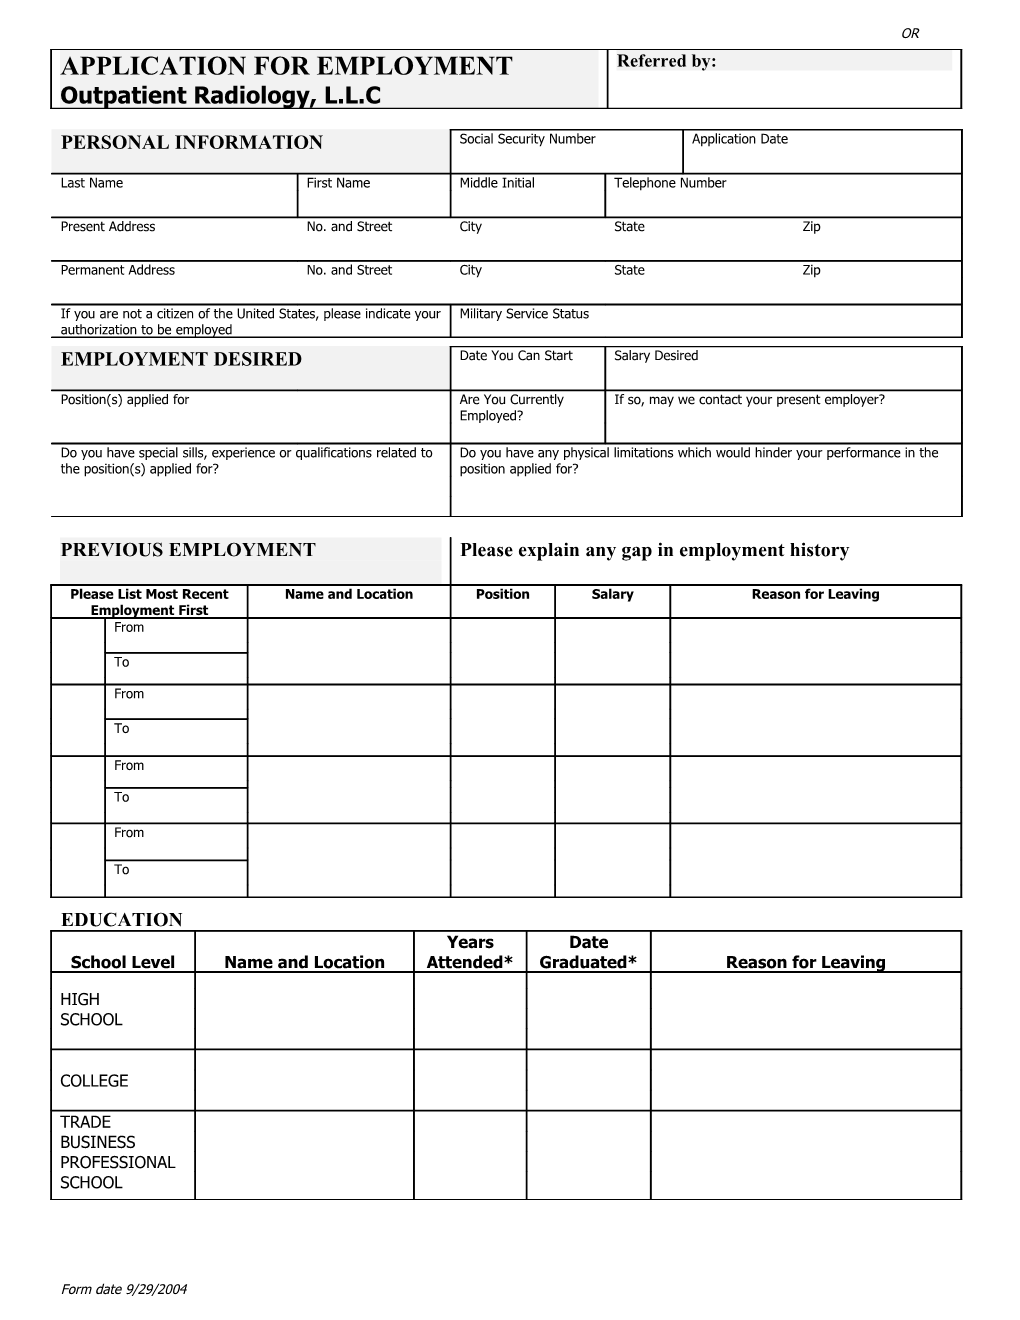 Application for Employment s40